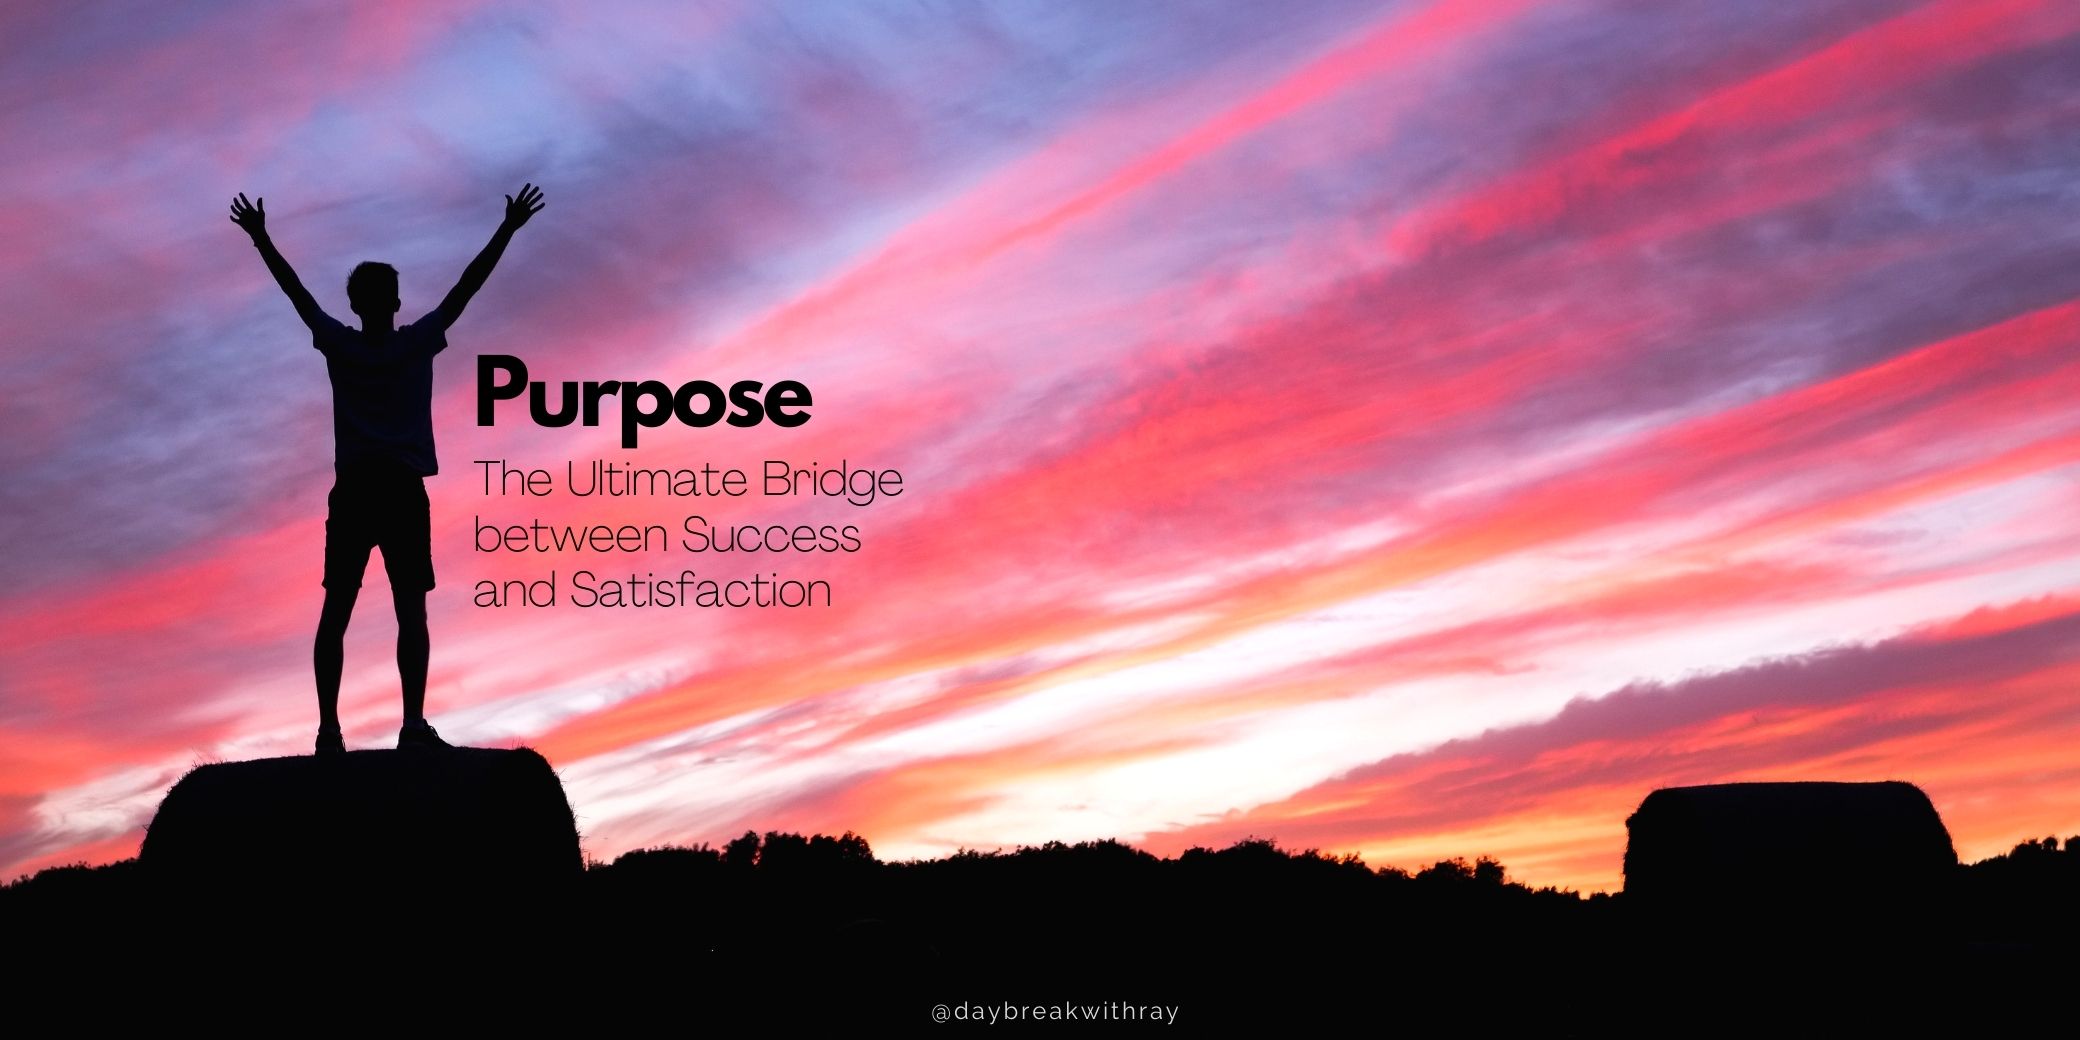 (Featured Image) Purpose The Ultimate Bridge between Success and Satisfaction